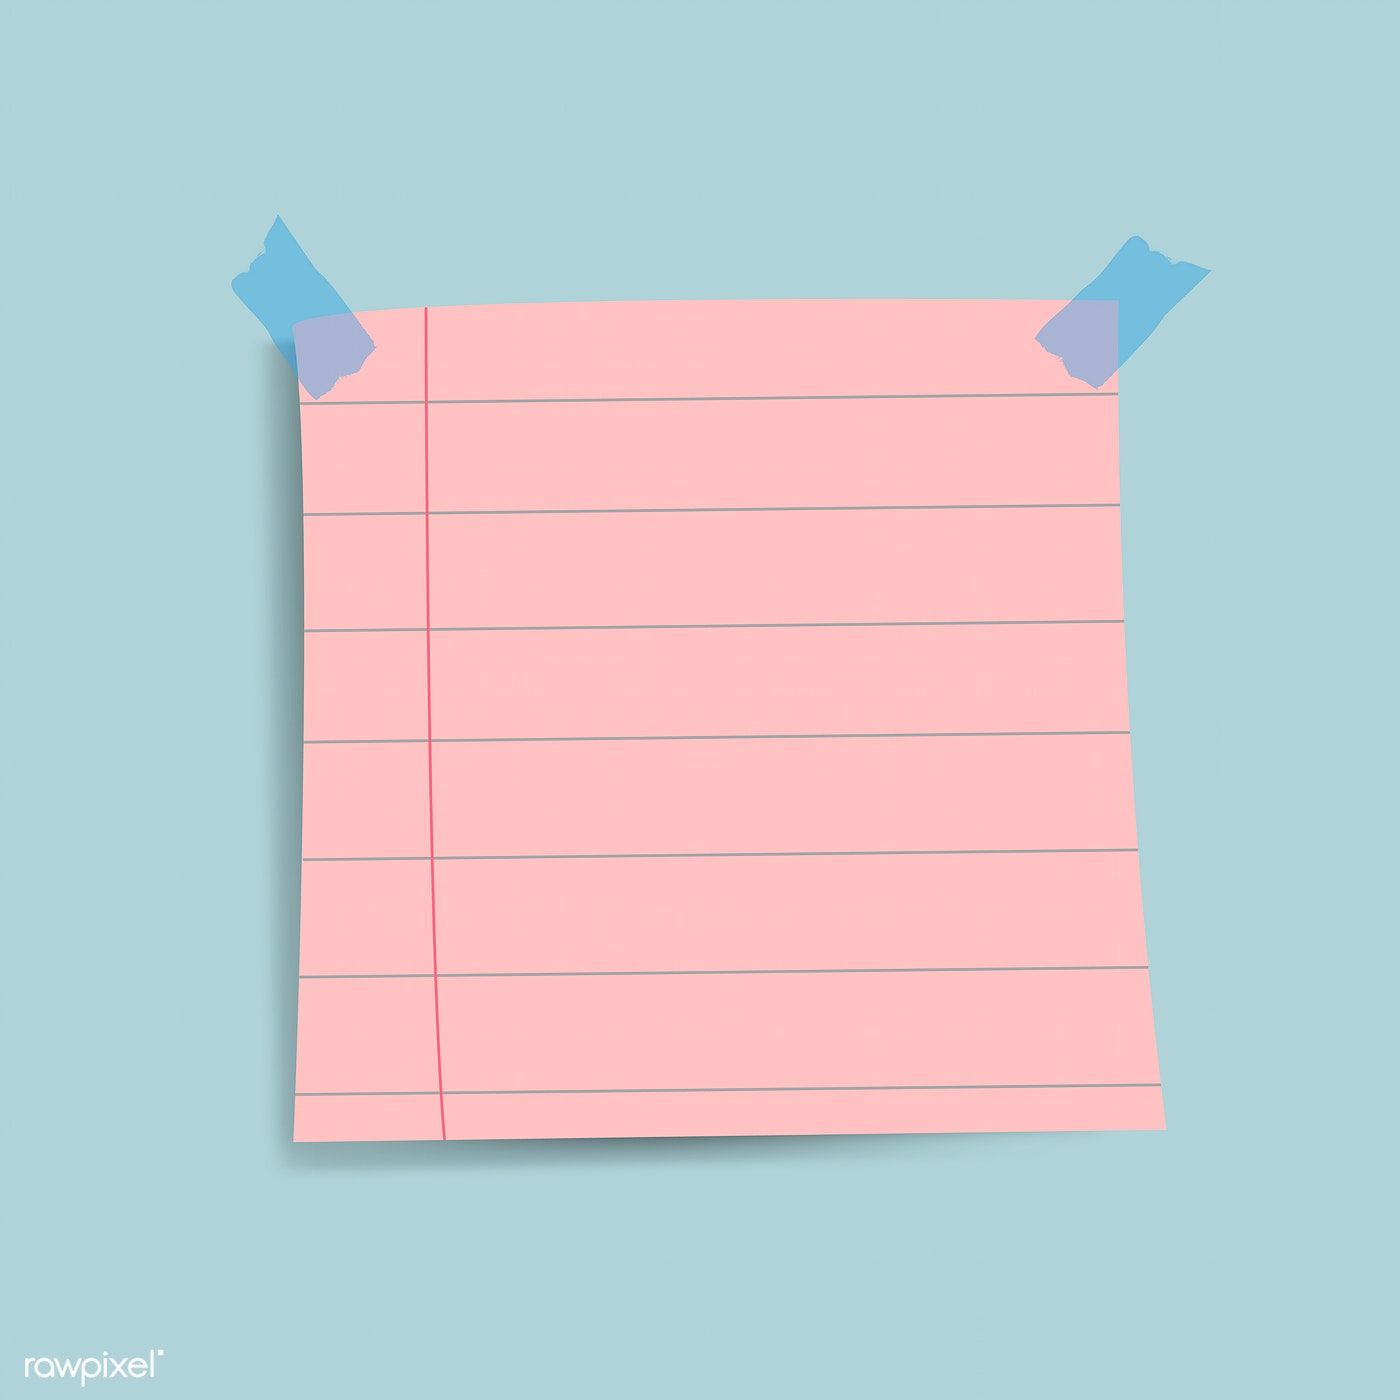 Sticky Note Background Images  Free Download on Freepik